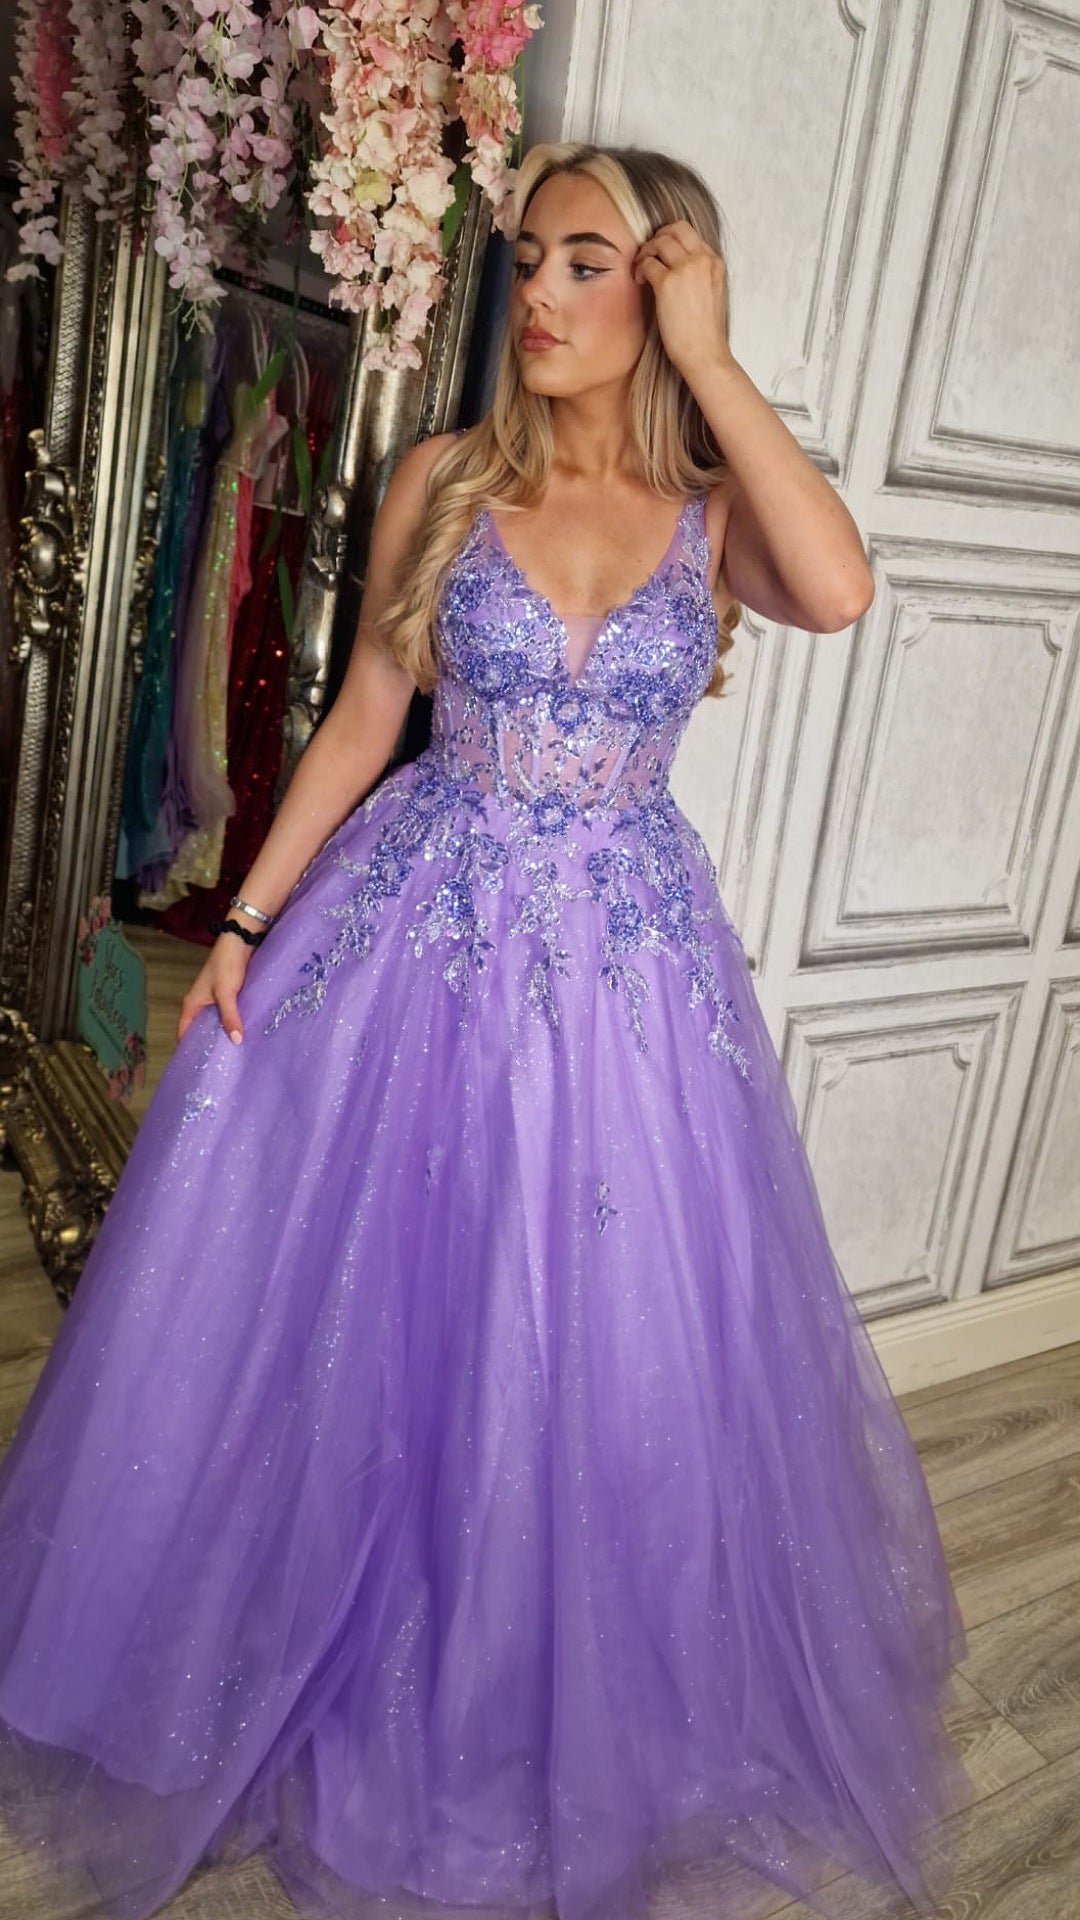 Taylor Lilac Embellished Corset Flower Detail Ball Gown Formal Prom Dress